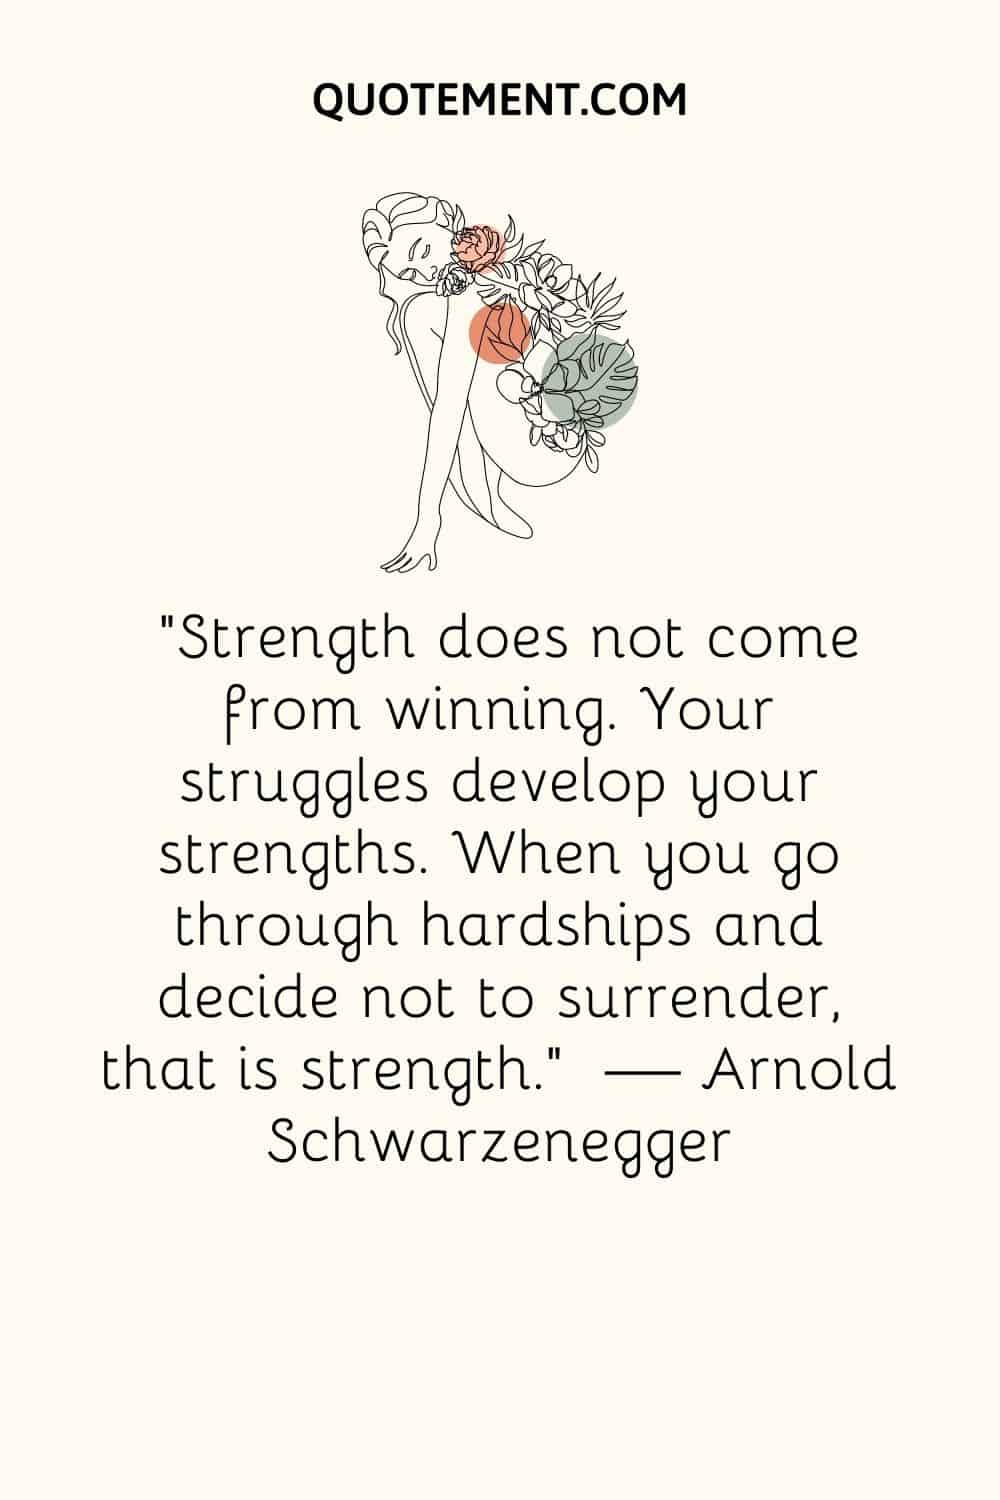 illustration of a girl with flowers on her back representing inner strength motivational quote